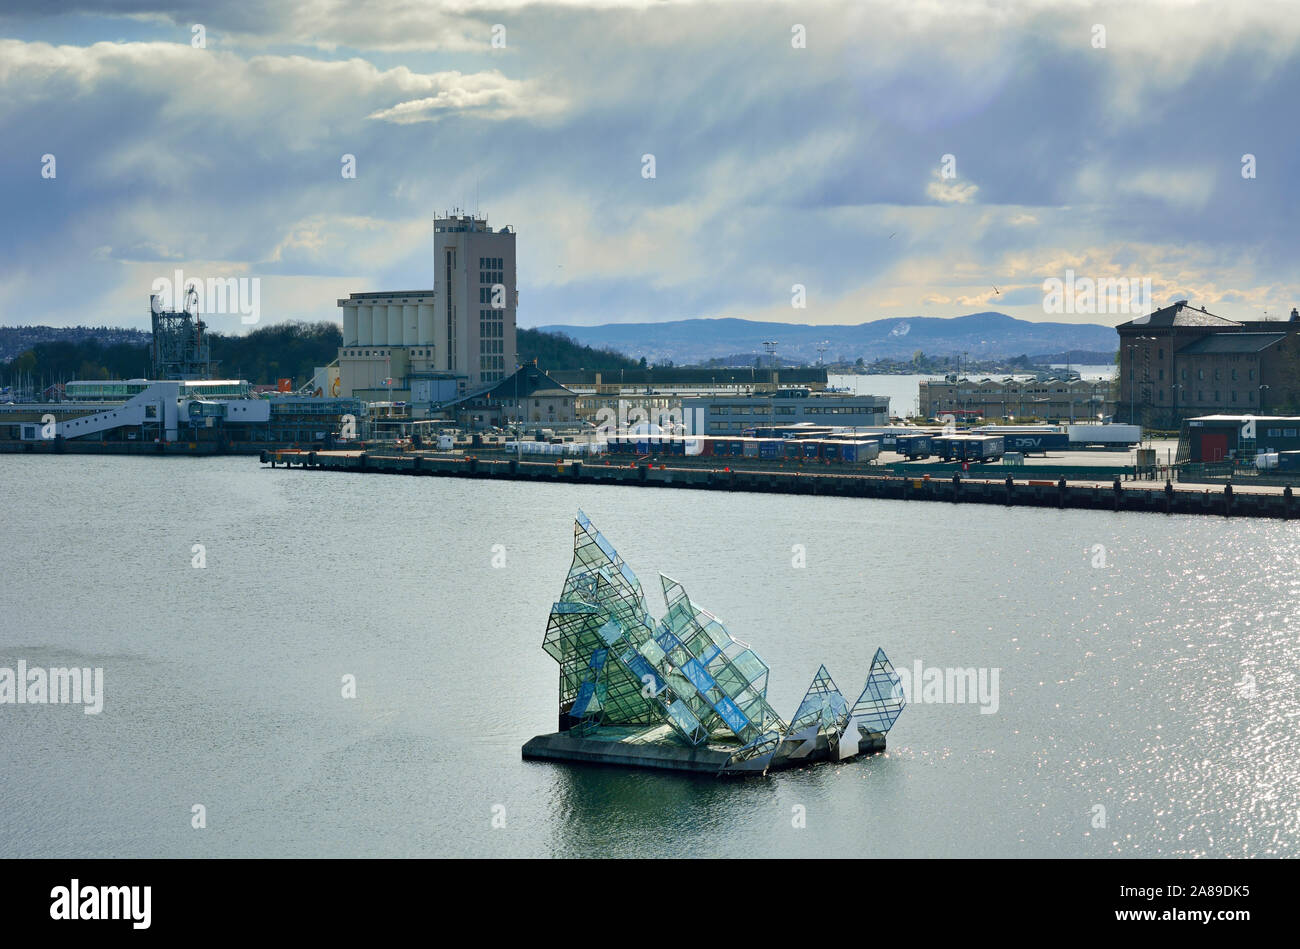 The sculpture, called She Lies, by the artist Monica Bonvicini, seems to float on the waters of the Oslo Fjord. Norway Stock Photo